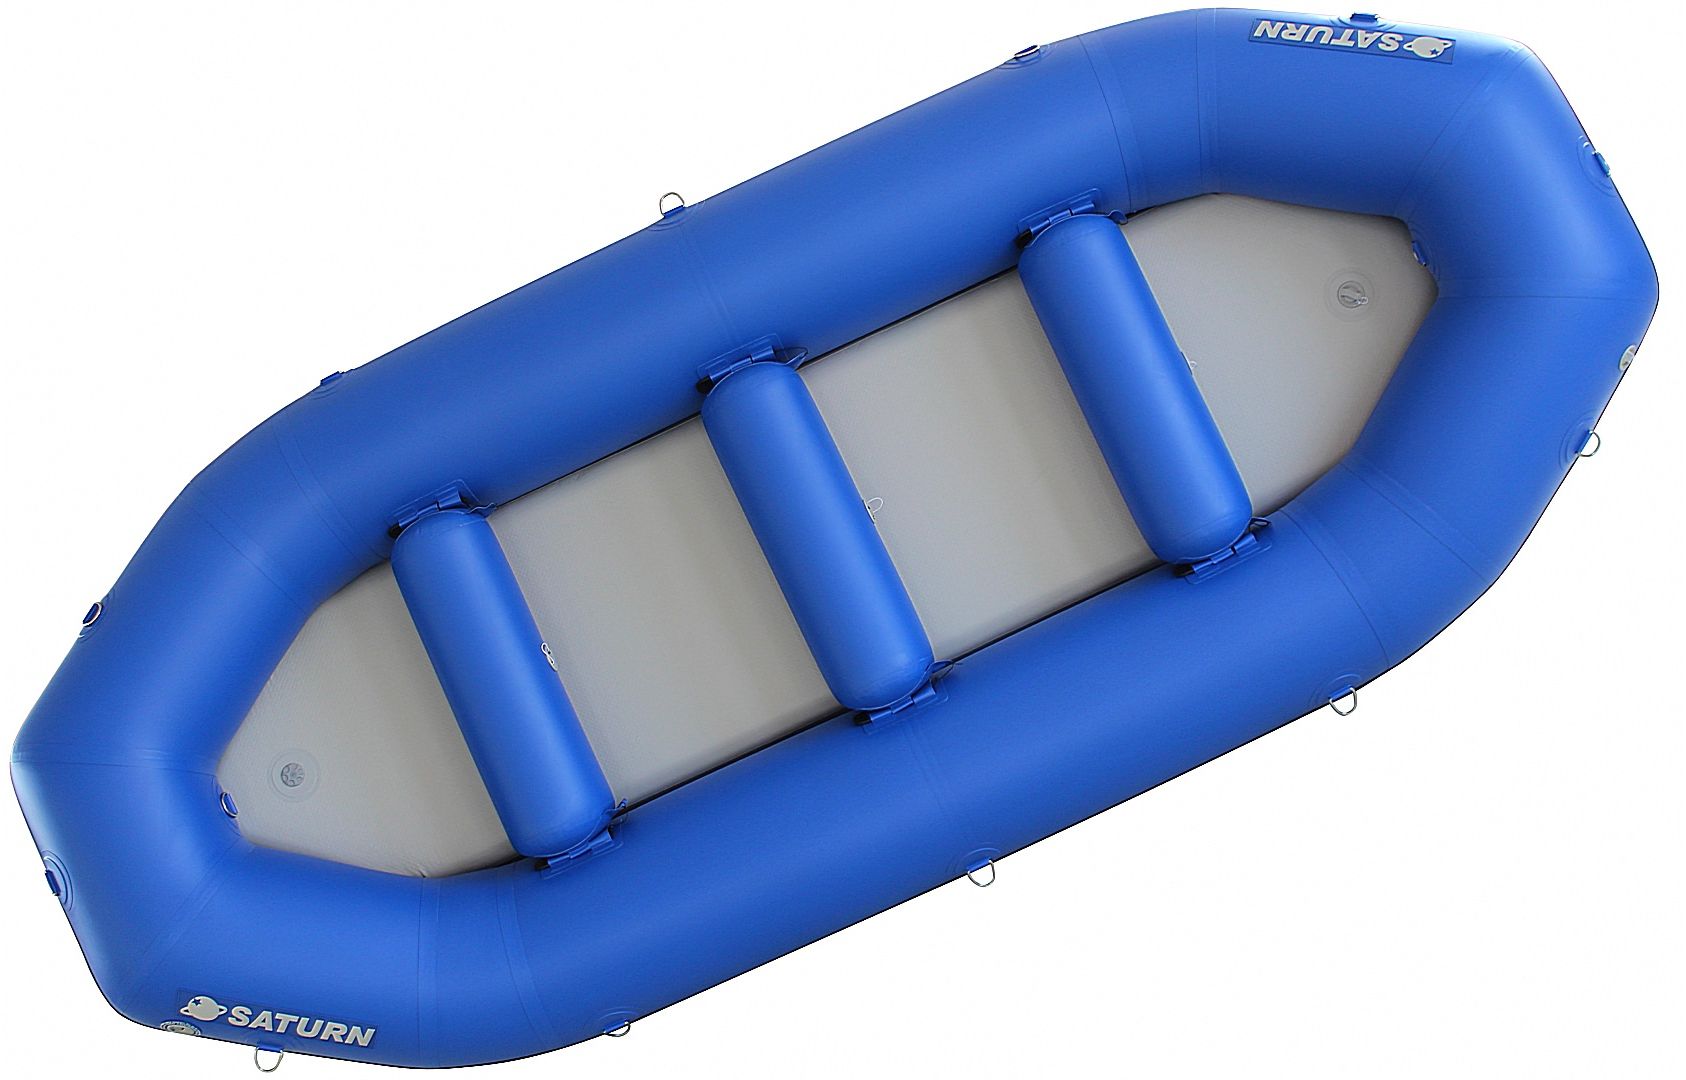 Classic 13' Saturn White Water River Raft for whitewater rafting